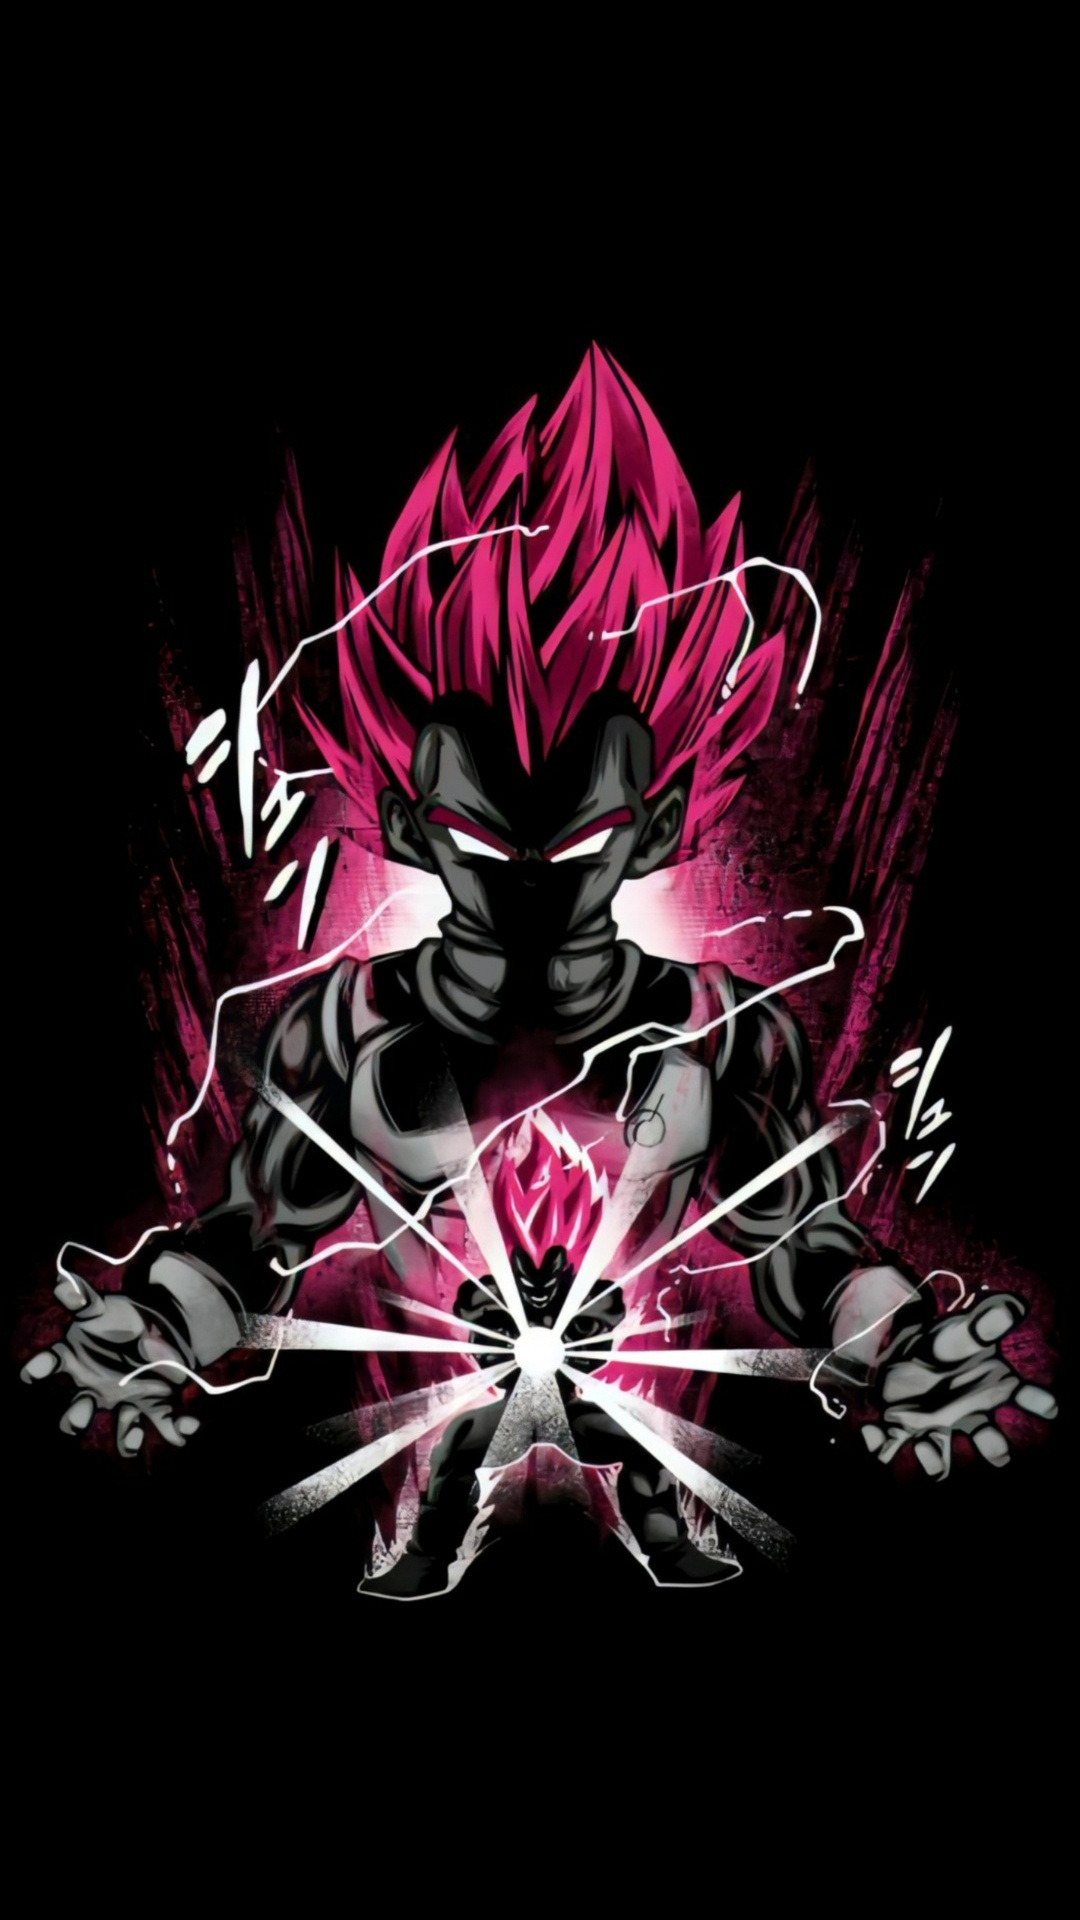 1080x1920 Vegeta Wallpapers for Android Mobile Smartphone [Full HD]